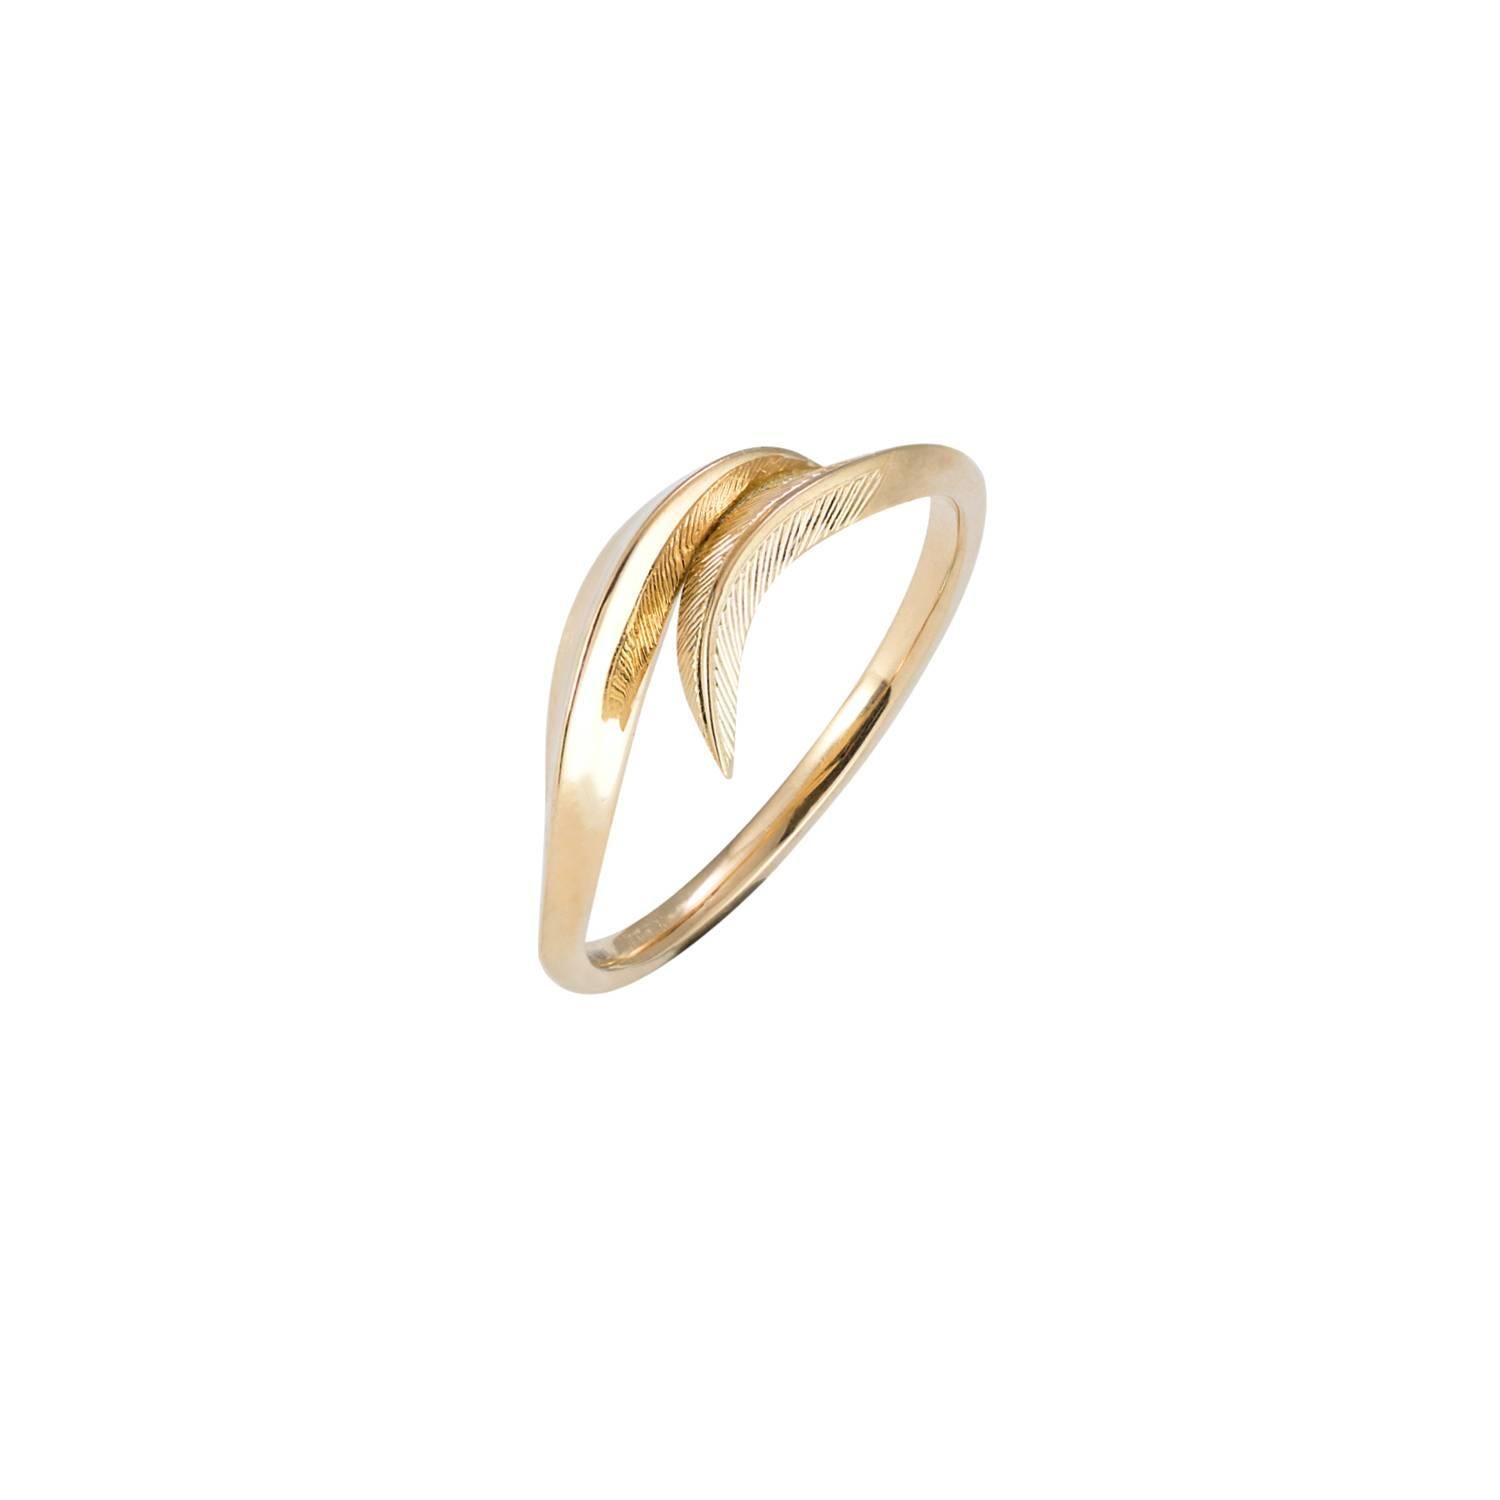 The Daou engraved 18 karat yellow gold feather ring is a subtle statement of femininity and refined details. The engraved feather contrasting with the polished and the movement in the shape. Beautifully wearable and combines to create stunning